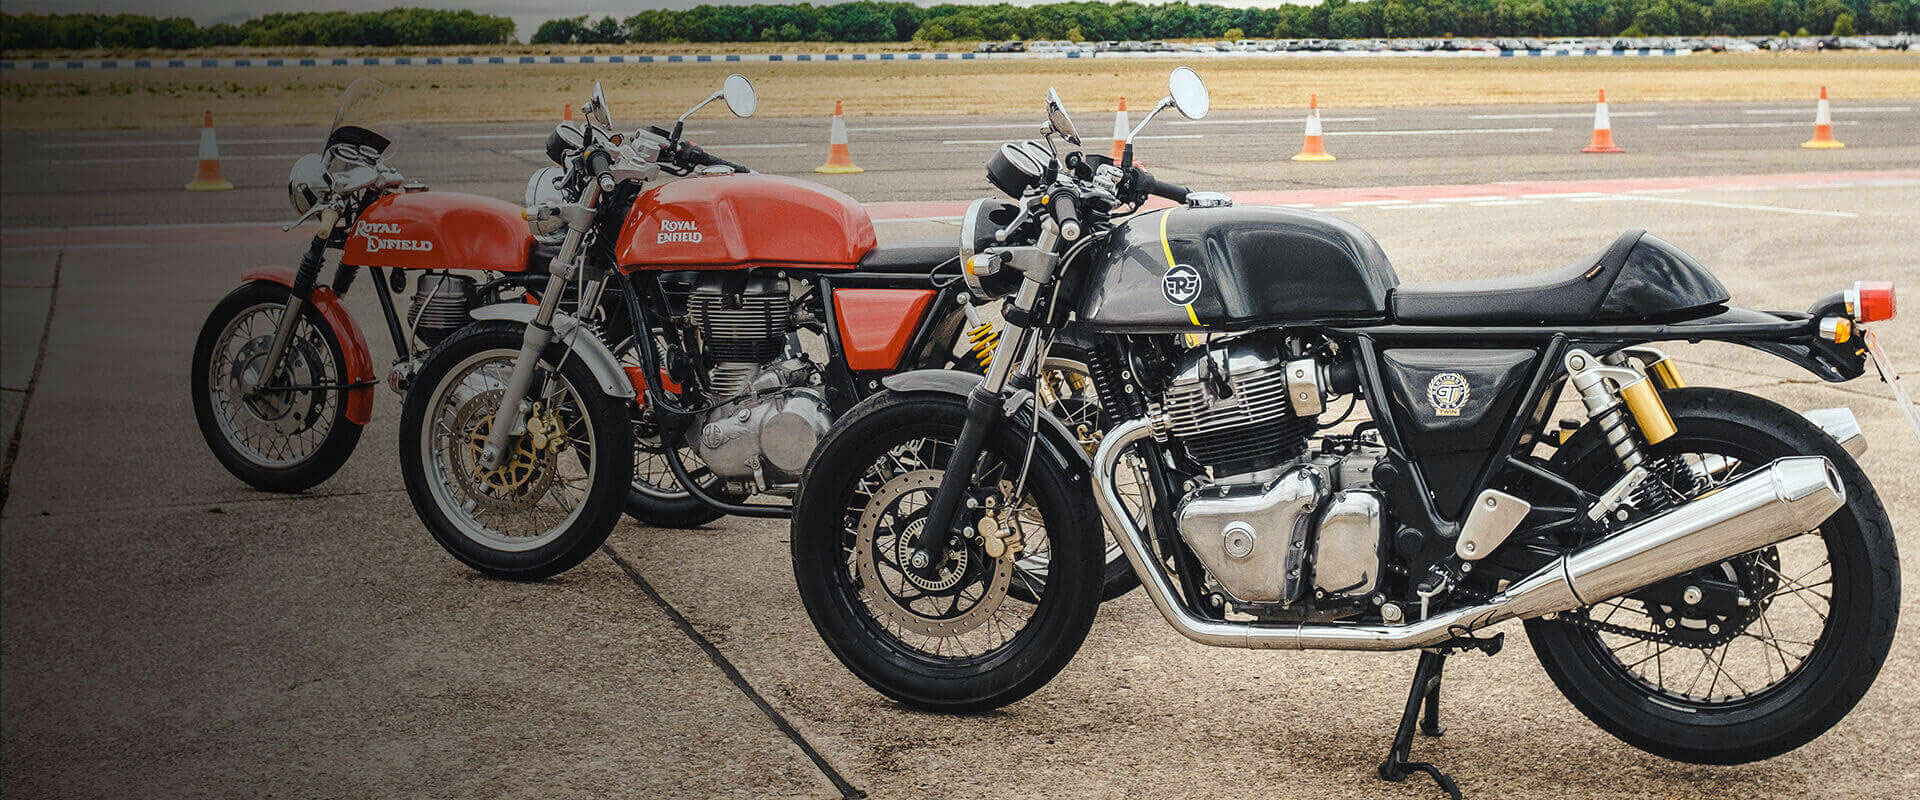 2019 Royal Enfield Continental Gt 650 Guide Total Motorcycle